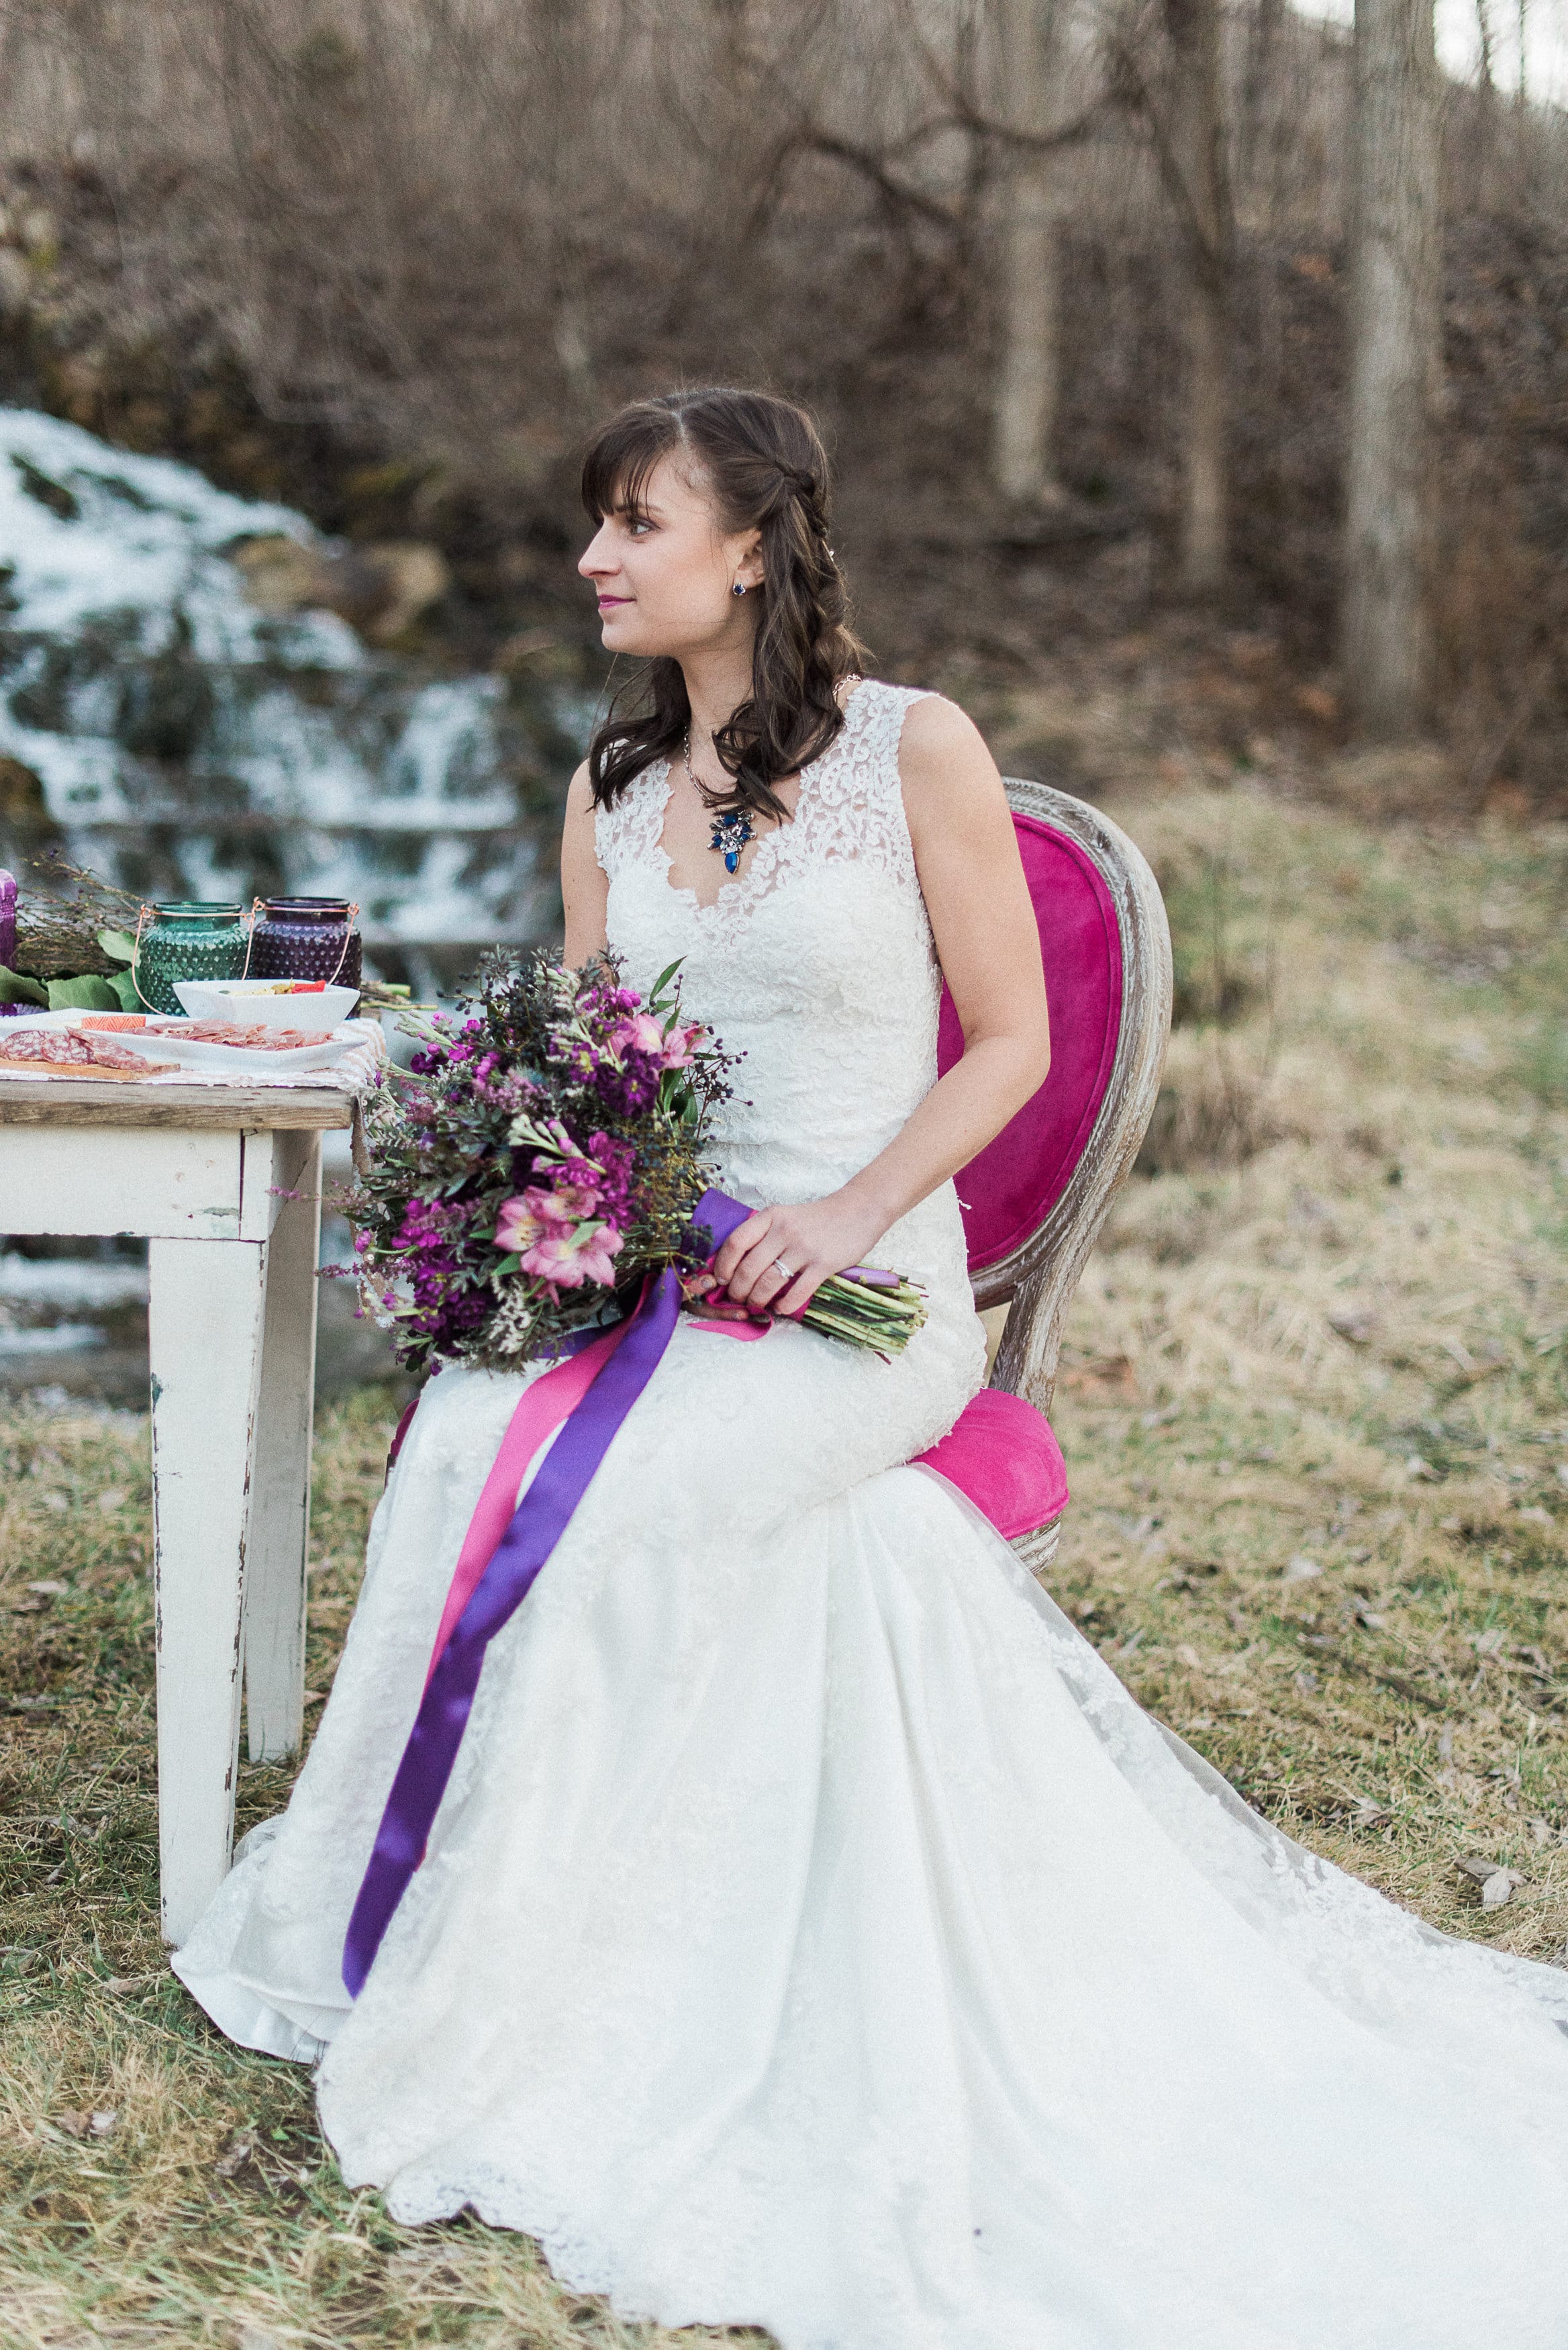 Lace Gown Melanie with Jewel Tones and Waterfall - Maggie Sottero's Melanie gown styled with a jewel-tone wedding palette and a waterfall wedding venue.